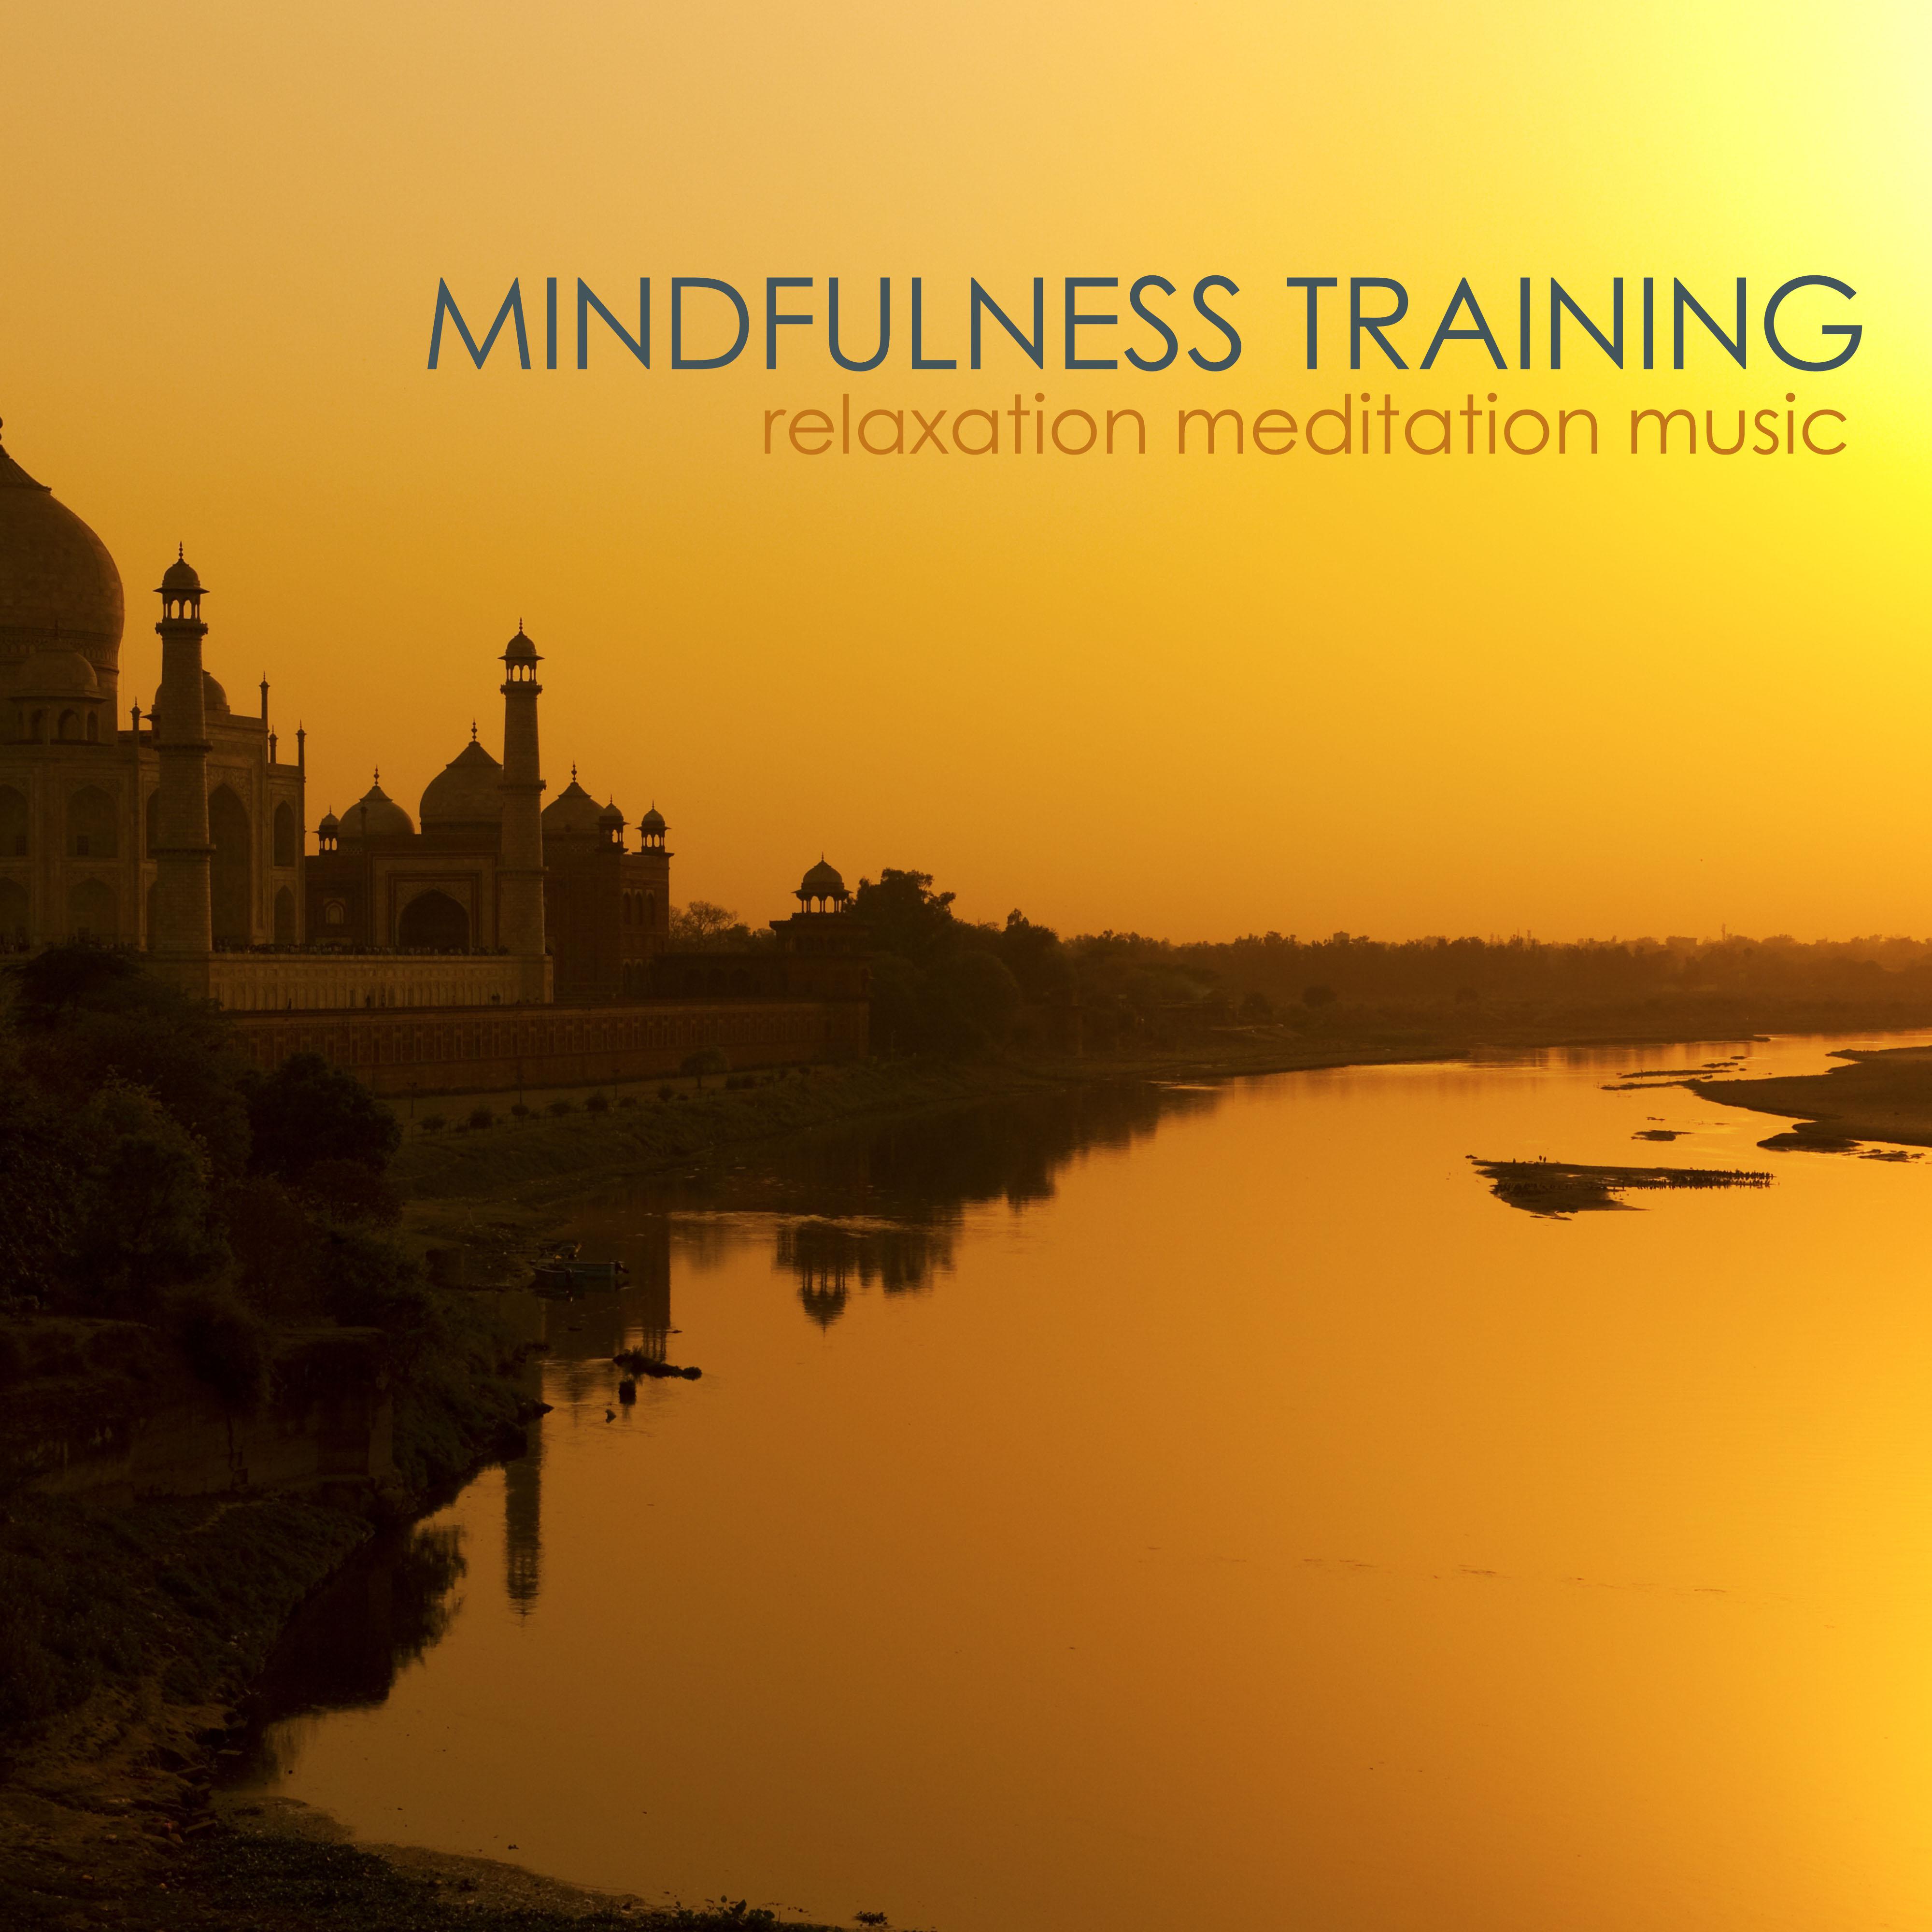 Mindfulness Training - Relaxing Meditation Music for Mindful Techniques & Yoga Exercises